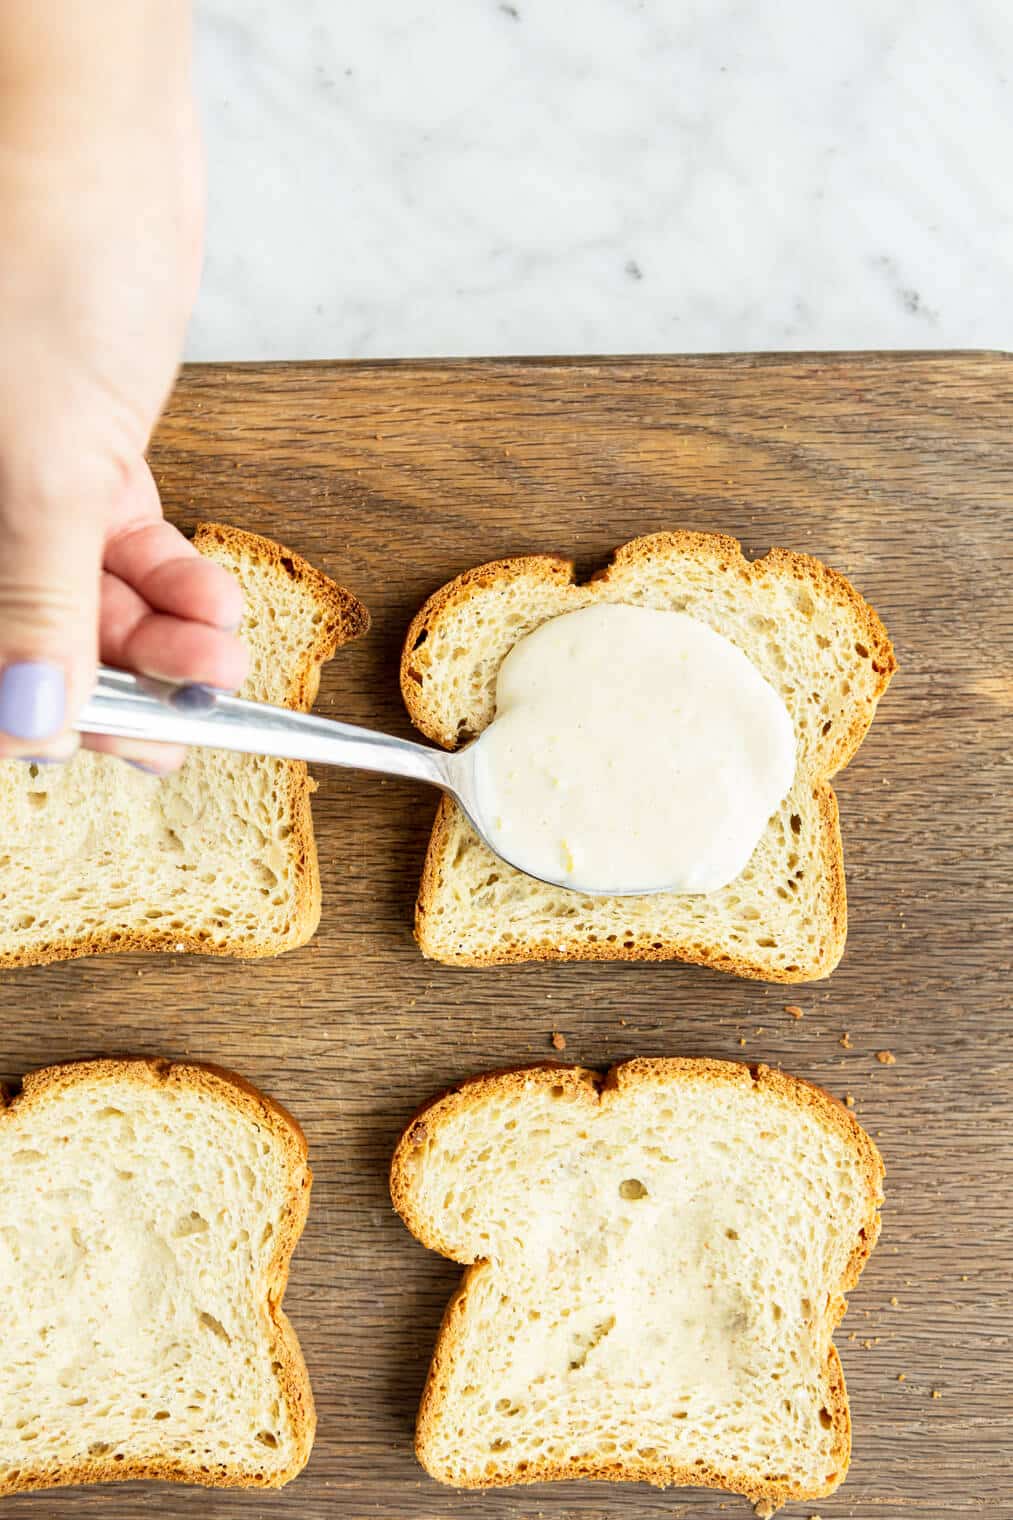 Hand holding spoonful of custard adding it to slice of bread on a wooden cutting board with 4 other slices of bread.